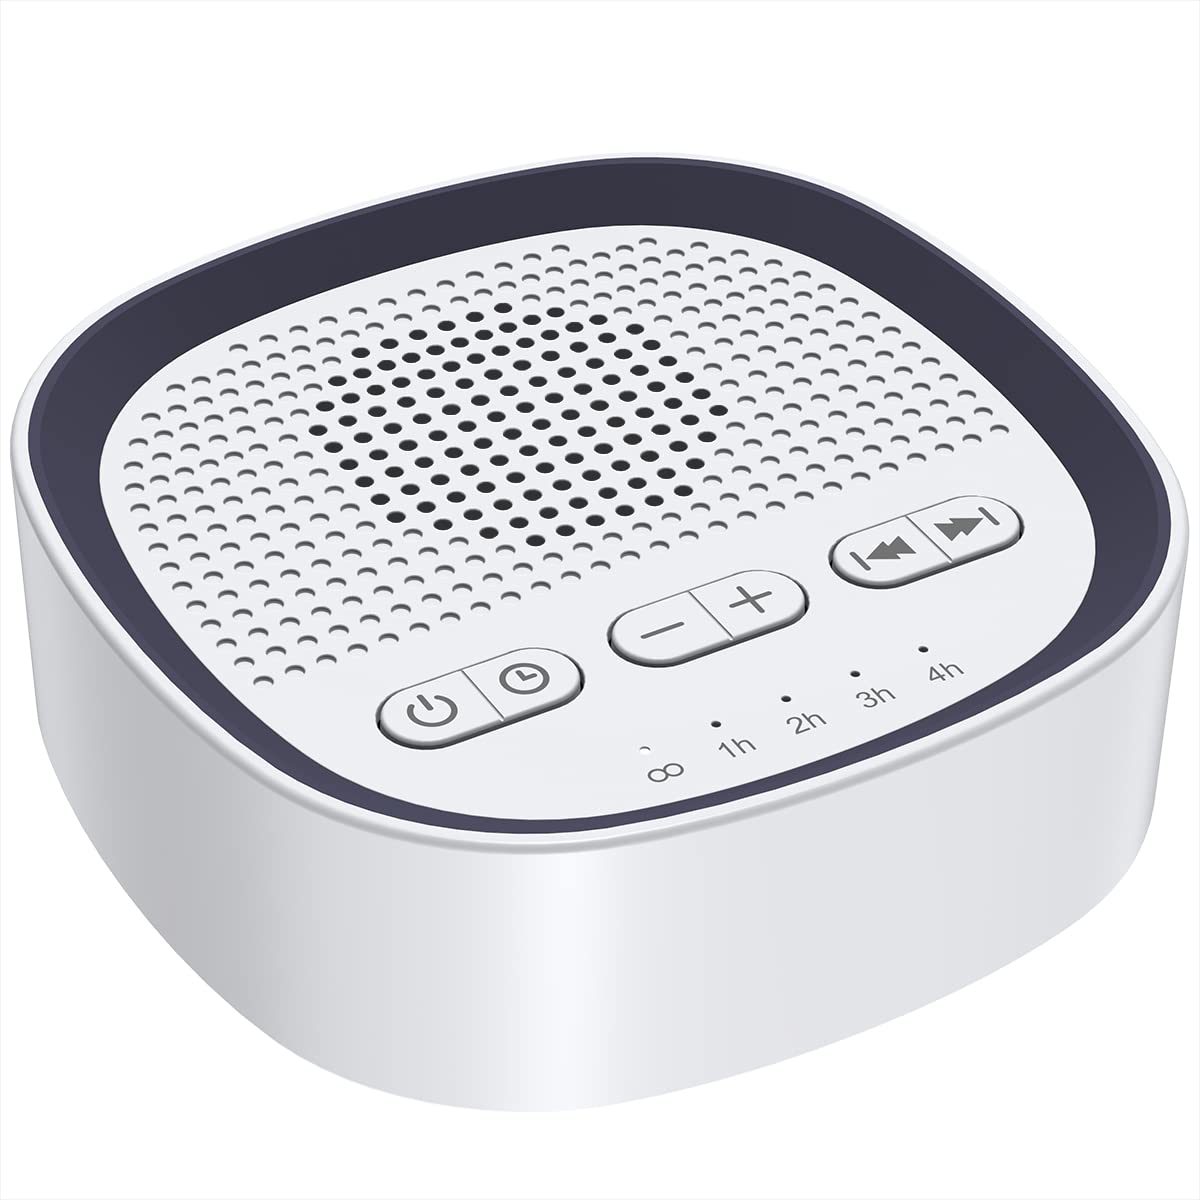 Sleepbox Sleep White Noise Sound Machines with 30 Soothing Sounds 3.5 mm Headphone Jack 5 Timer Settings and 32 Precise Volume Compact Design Ideal Gift for Home Office Travel